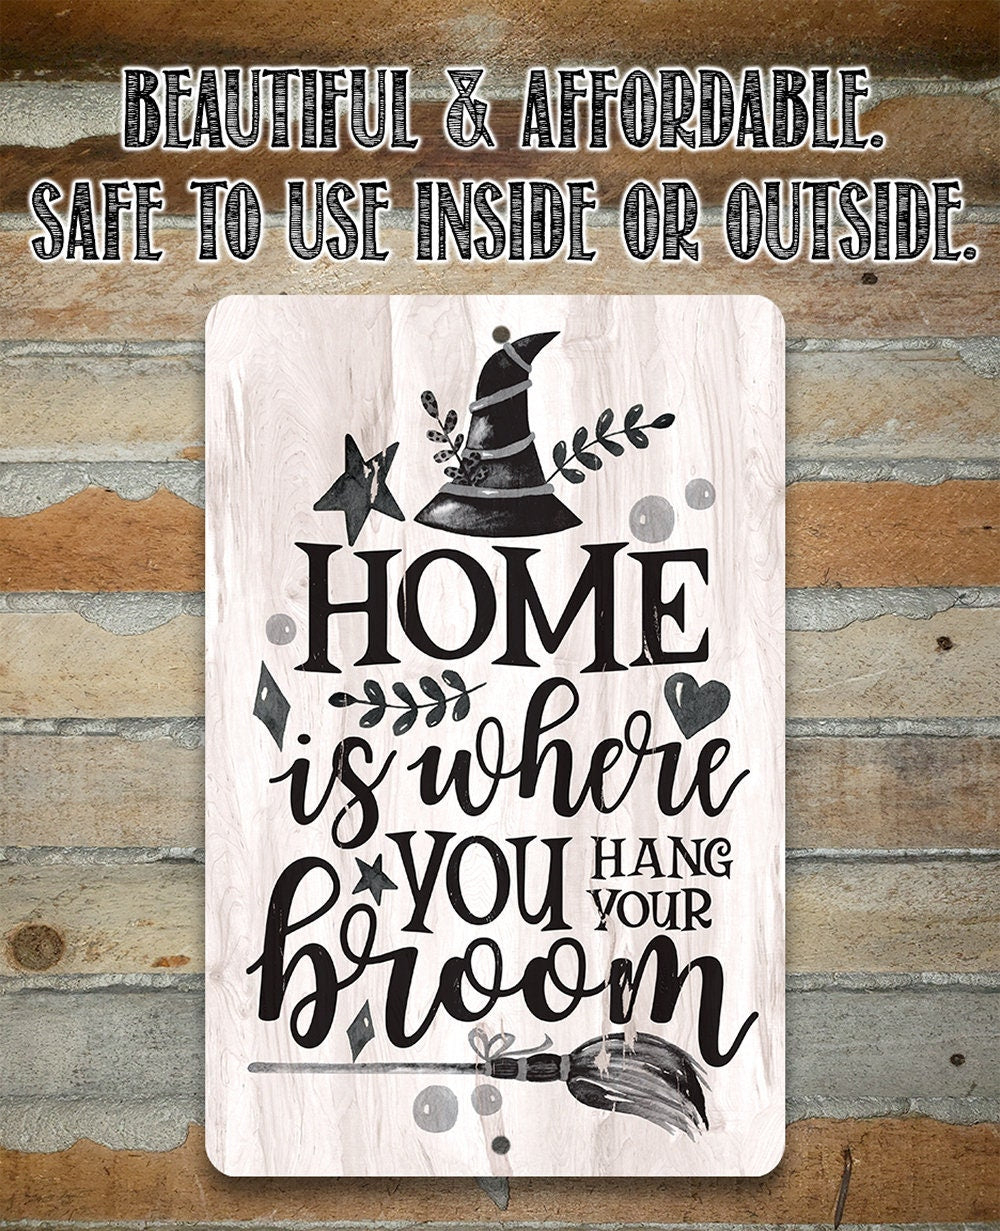 Home Is Where You Hang Your Broom - Metal Sign Metal Sign Lone Star Art 